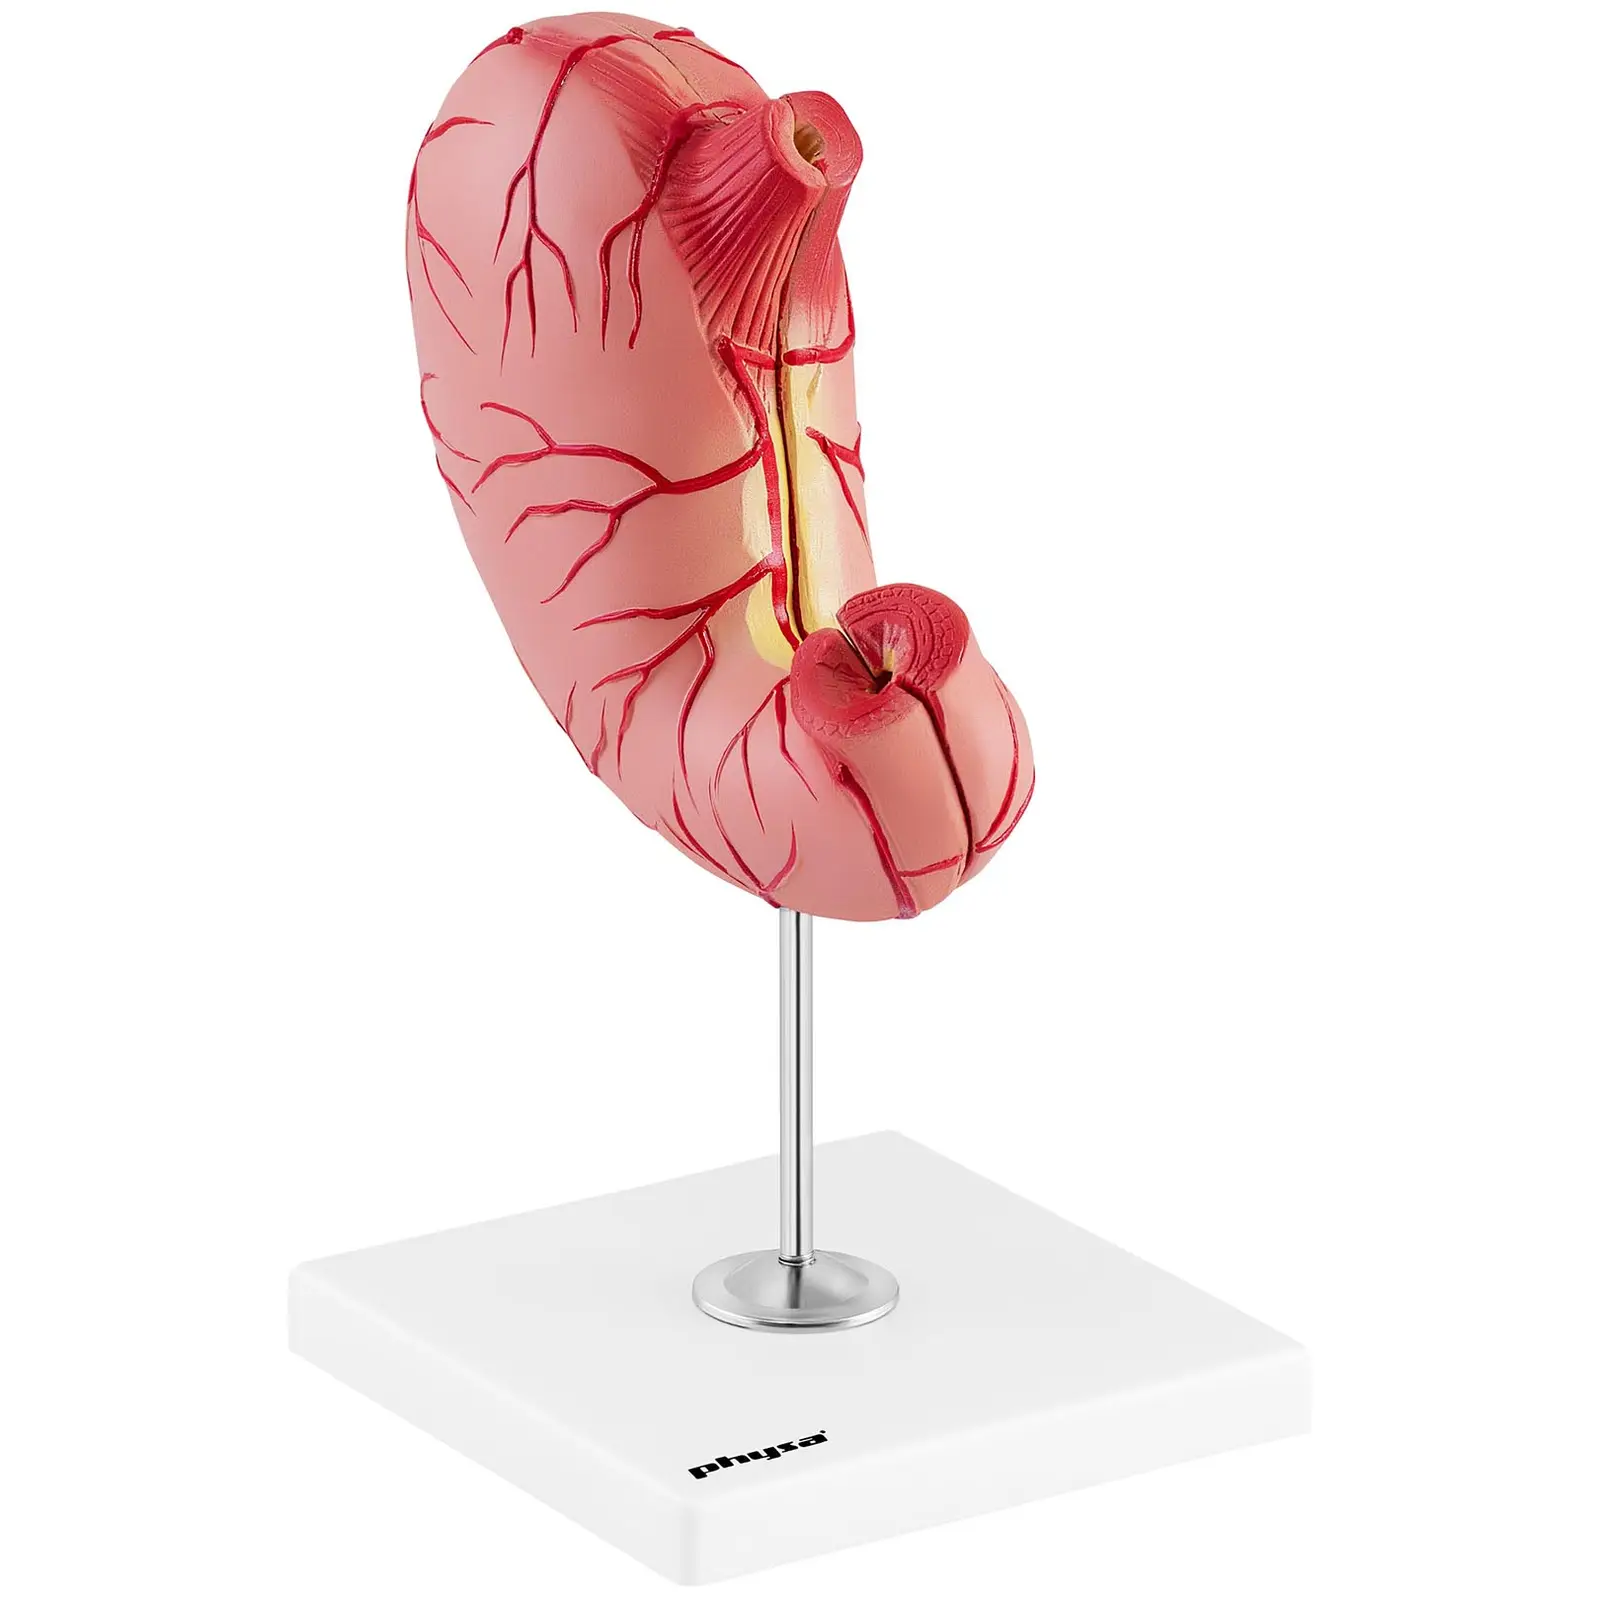 Stomach Model - separable into 2 pieces - life-sized